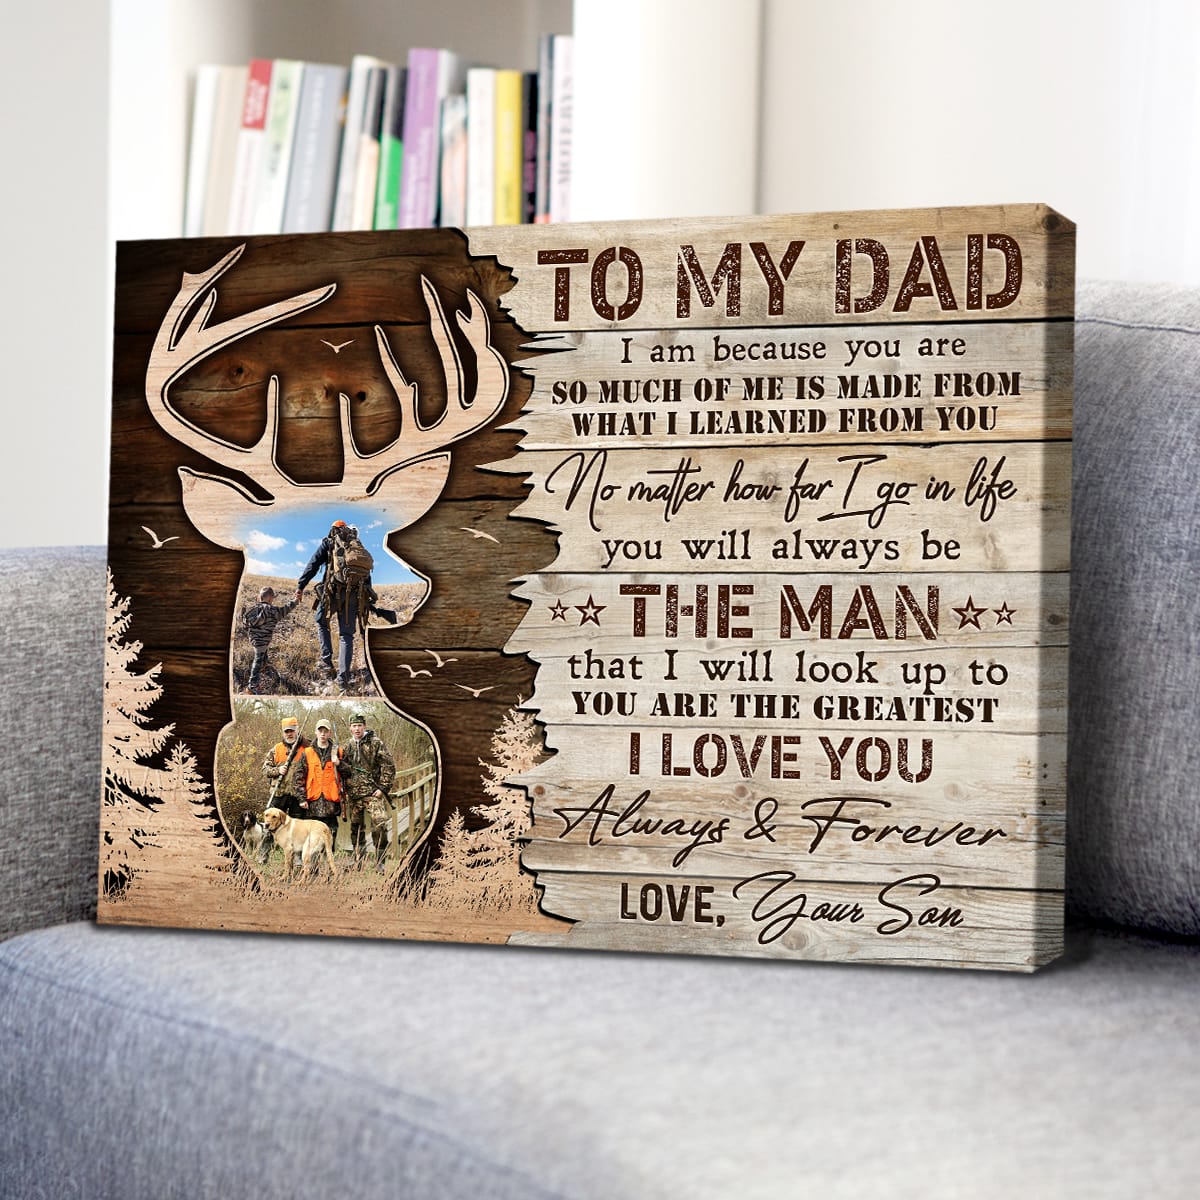 Best Personalized Gifts For Dad For All Occasions